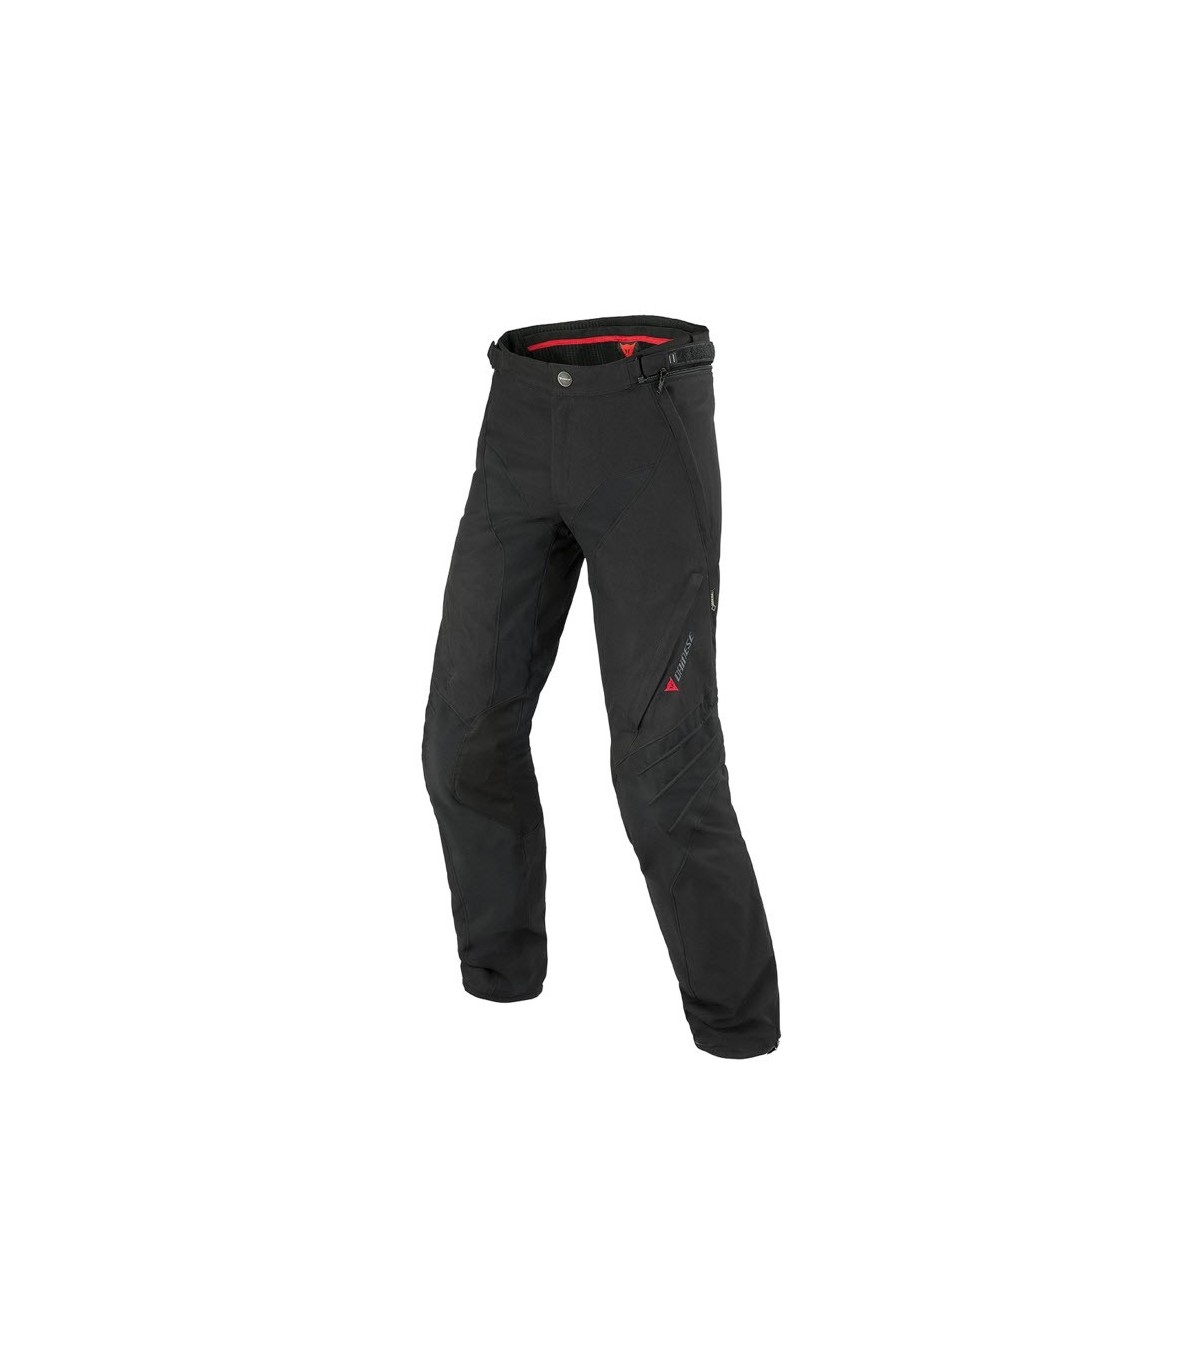 Mens Dainese Travelguard Gore Tex Riding Pants Trousers Biker Motorcycle  Size 48  eBay